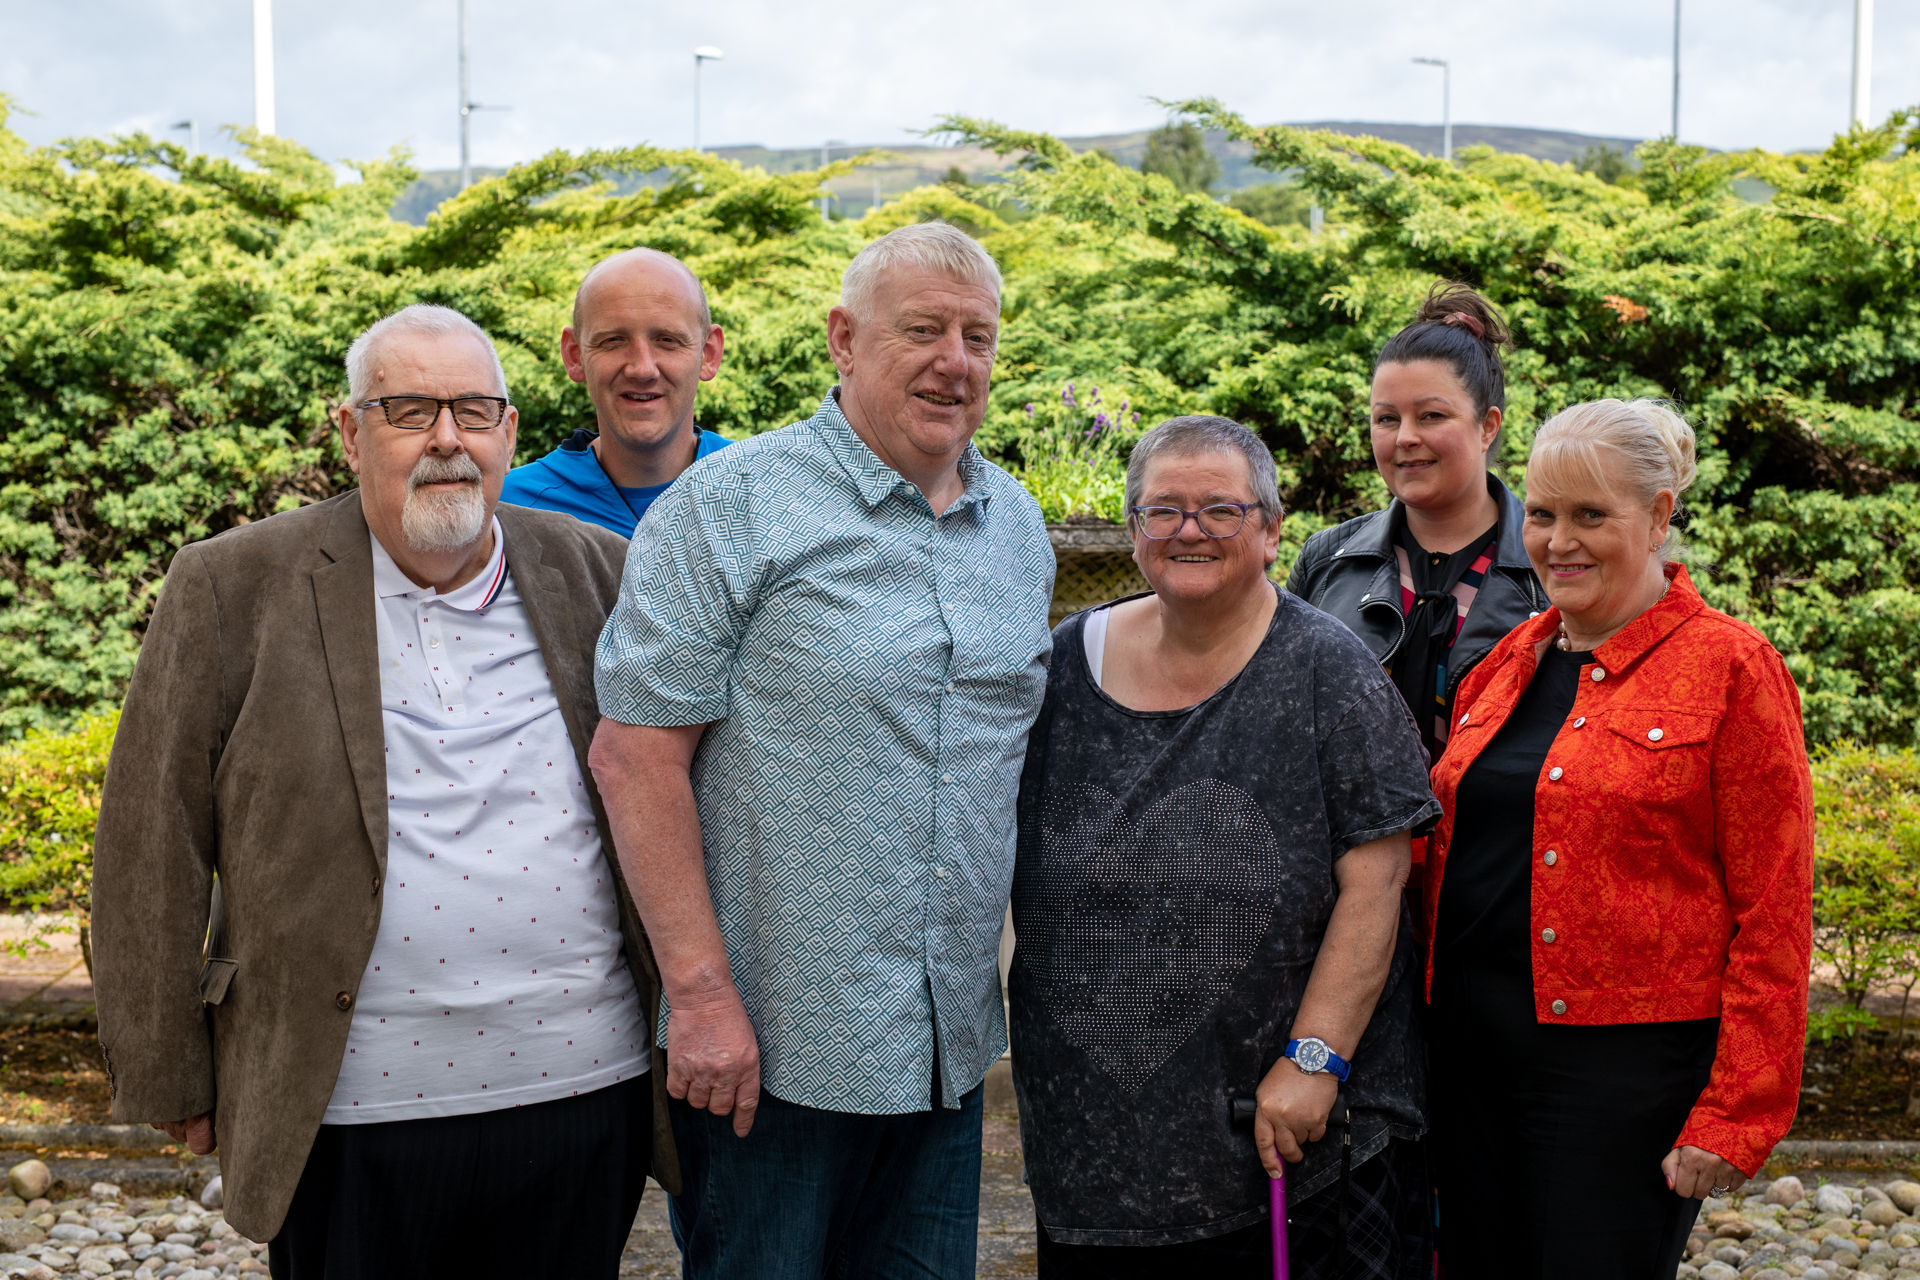 Margaret with other board members. From left to right , Brian Connelly MBE, Gordon Campbell (behind), Chairperson Calumn MacKay (Barney), Margaret Dymond, Catherine Coutts (behind) and Vice Chairperson, Janet Strang.